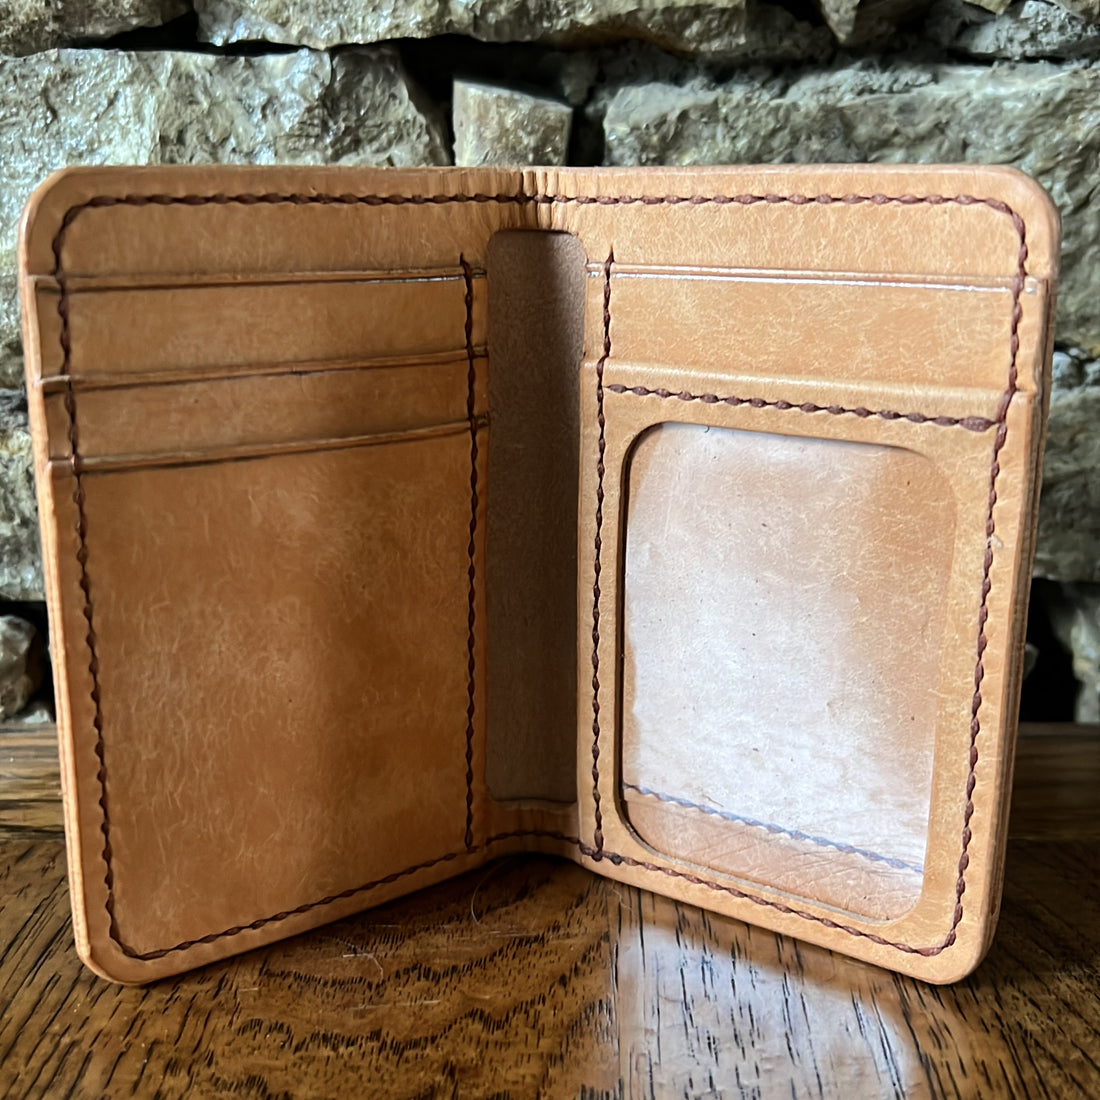 The Art of Choosing a Leather Wallet